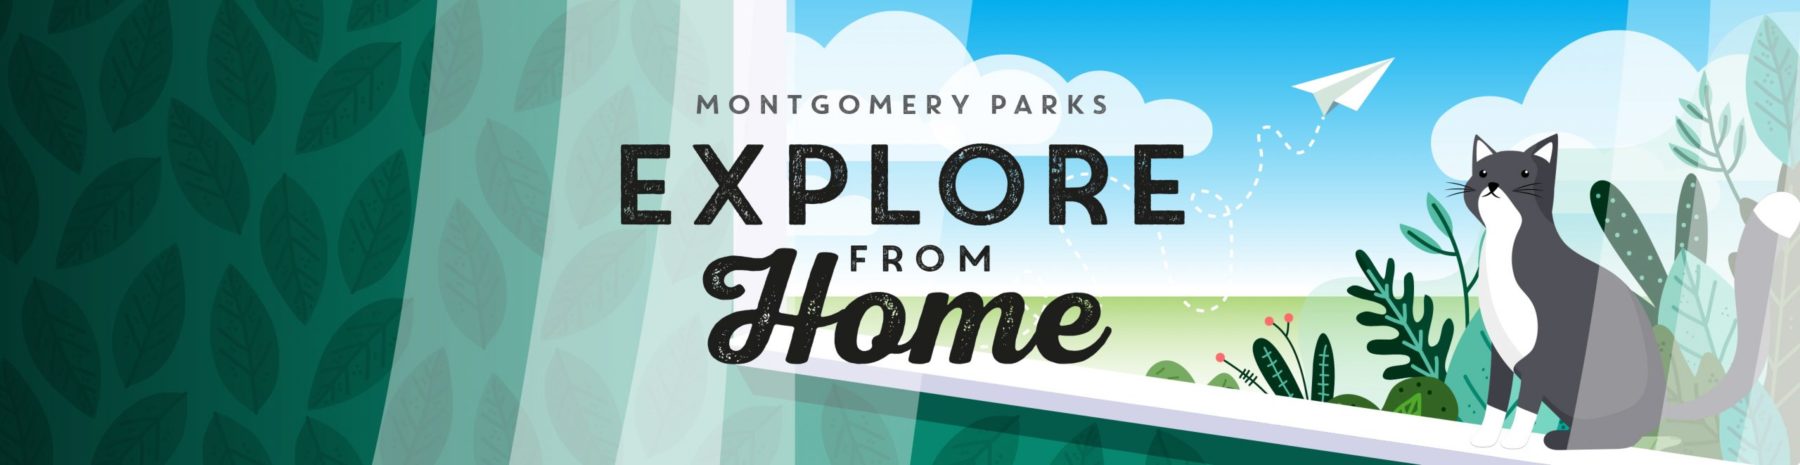 Montgomery Parks Explore from Home - cat graphic in window ledge